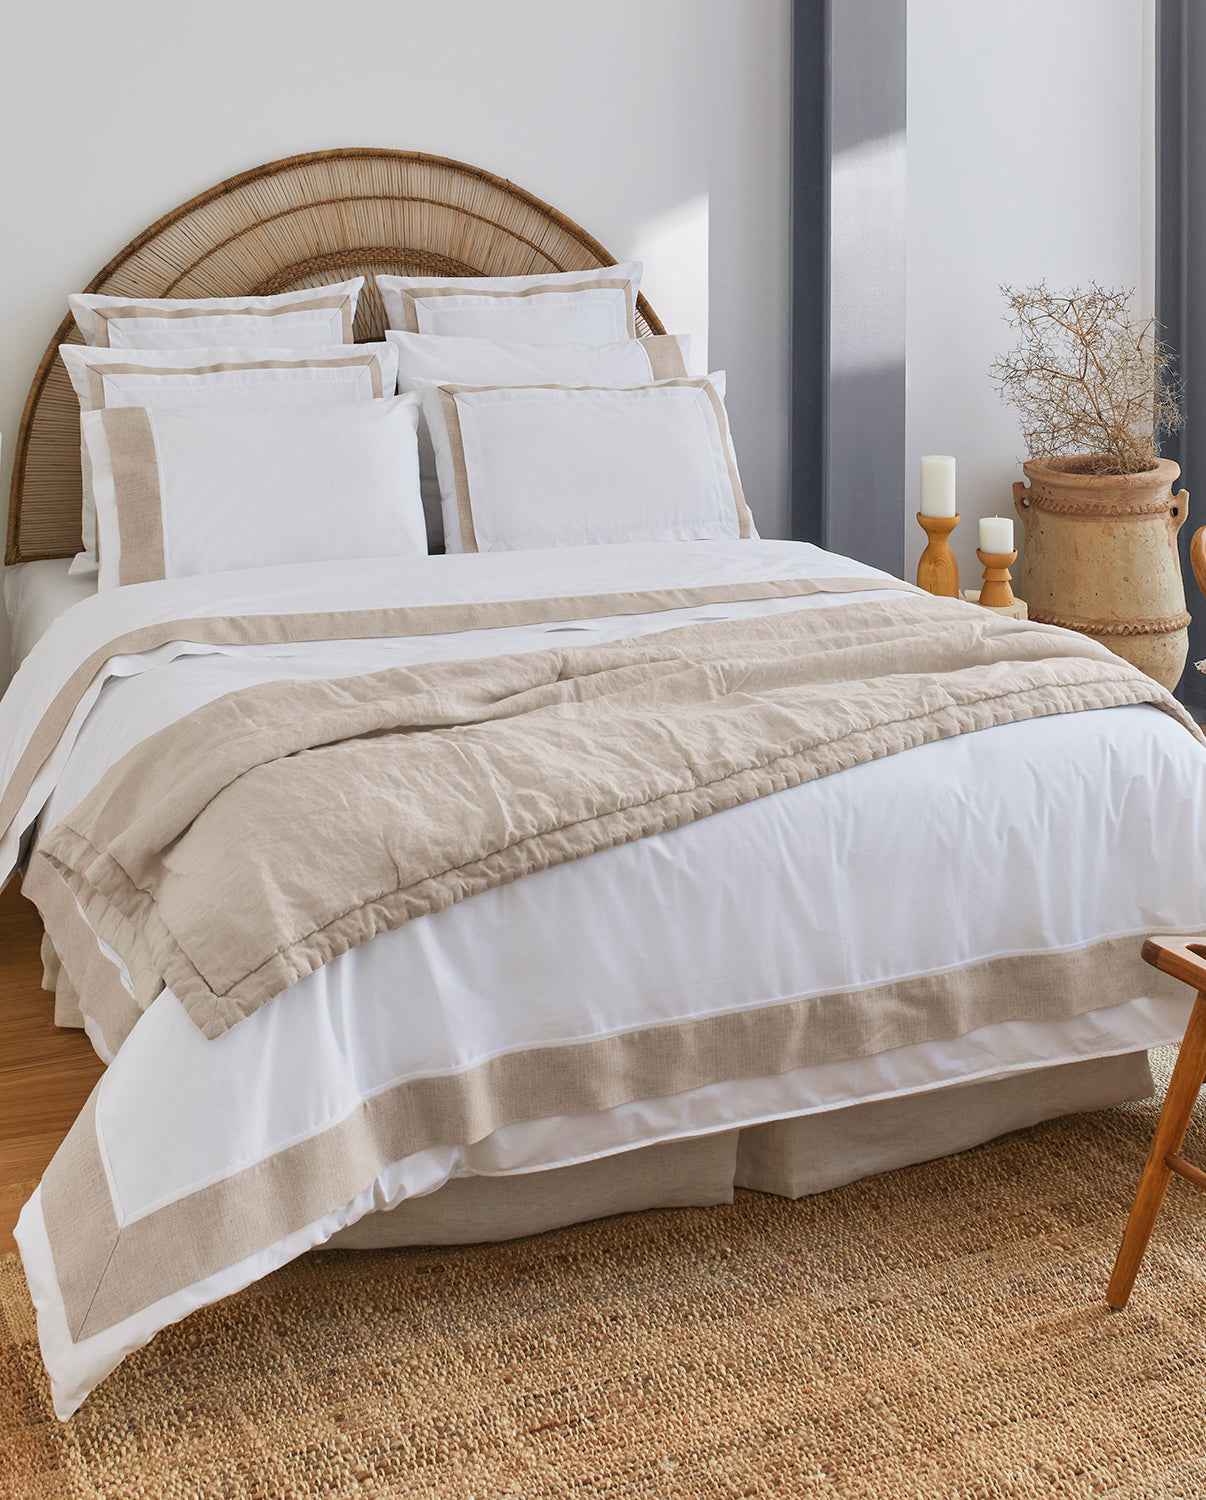 Discover unparalleled comfort with SOWL Home's Athens Cotton Percale Bed Set. Crafted from premium organic cotton, this set promises luxurious softness and breathability for a restful night's sleep.